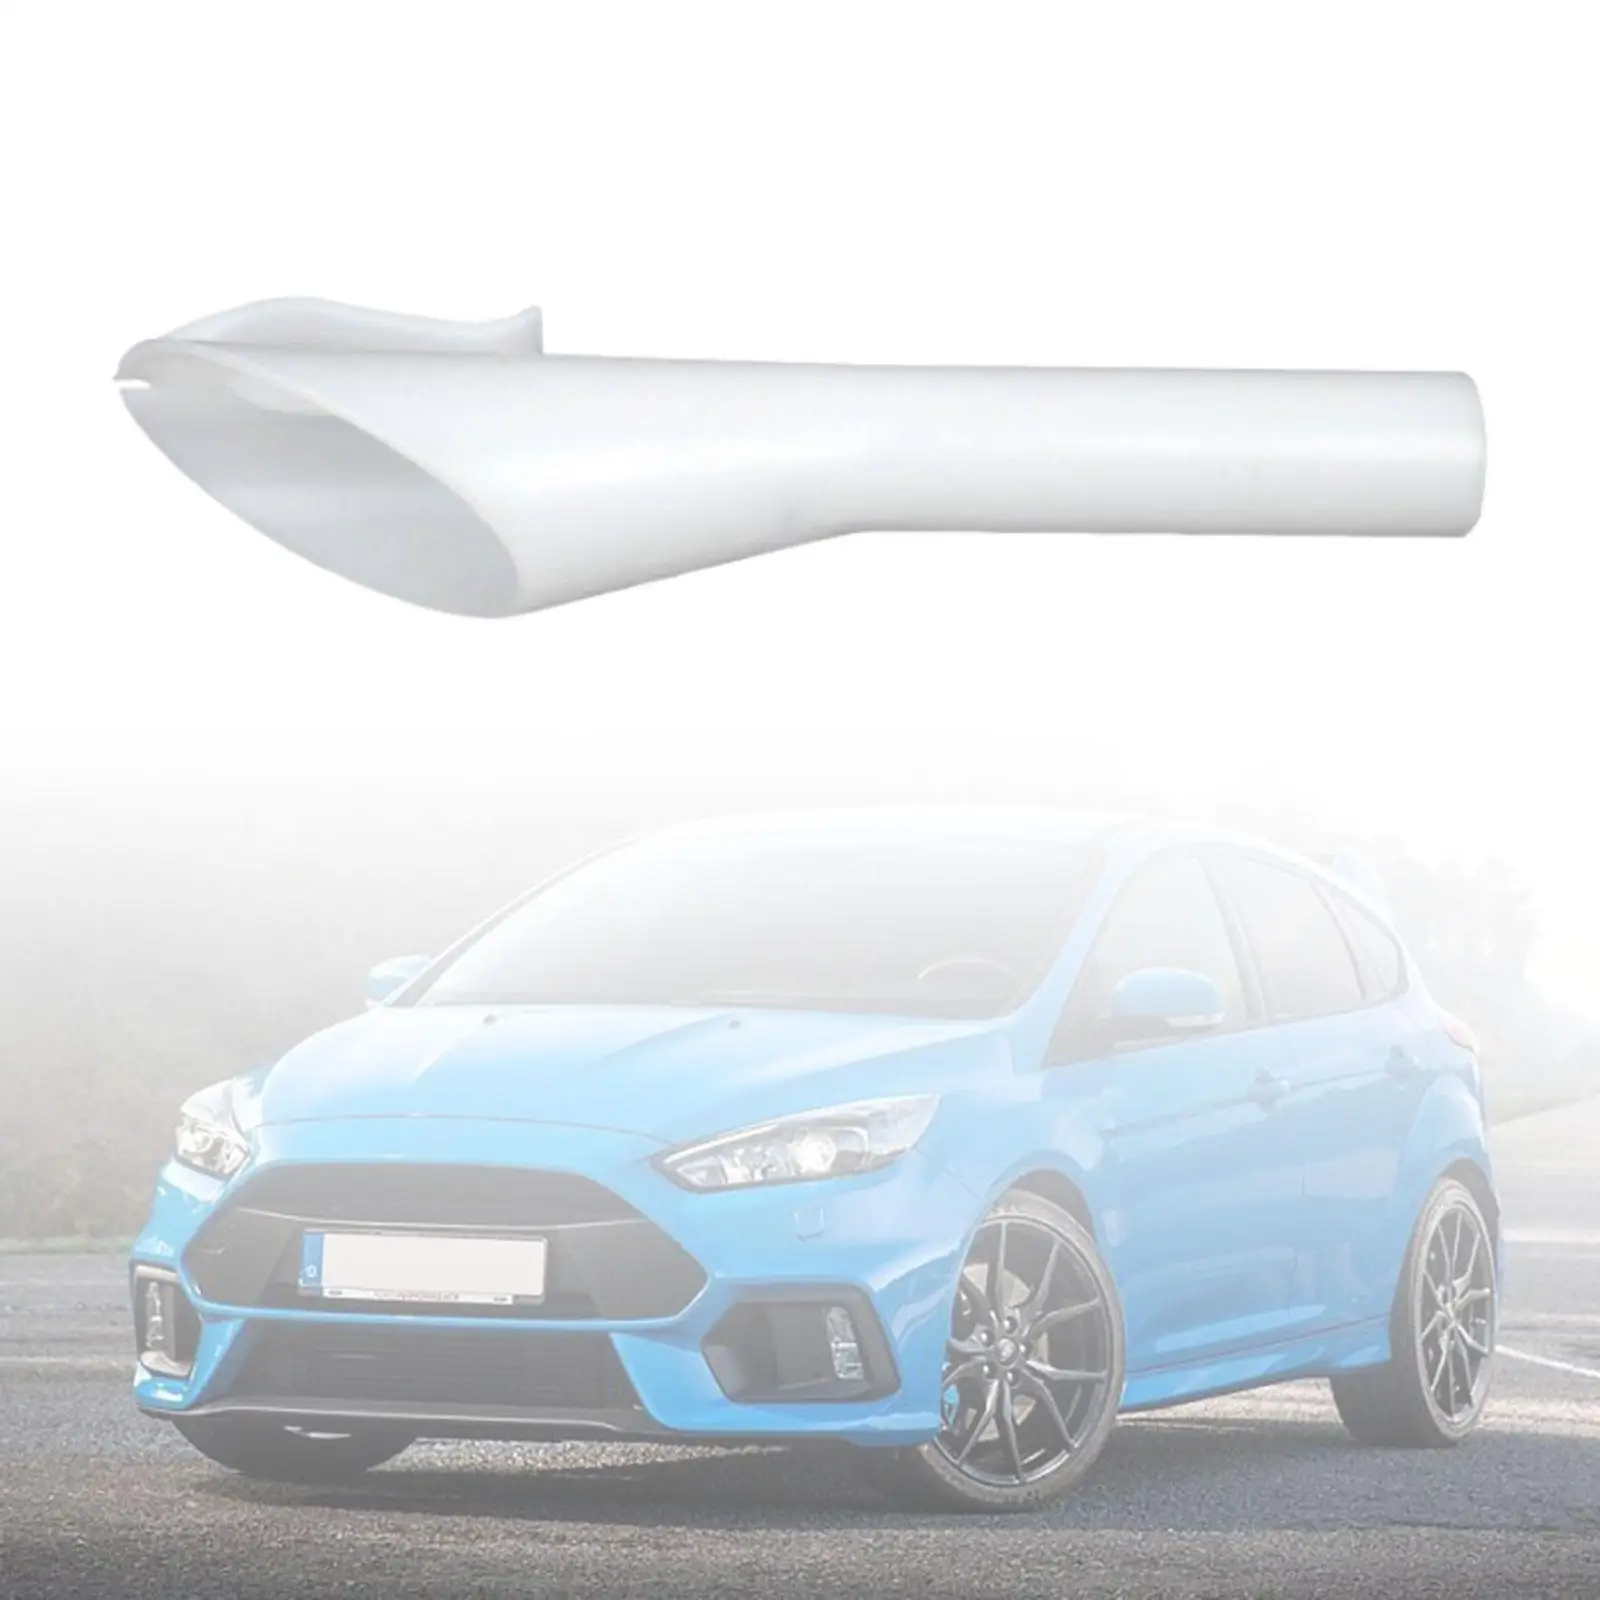 Fuel Fill Funnel Easy to Mount Fuel Tank Filler Neck Sleeve for Ford Petrol Emergency Fuel Filler Funnel Kuga C Max B Max